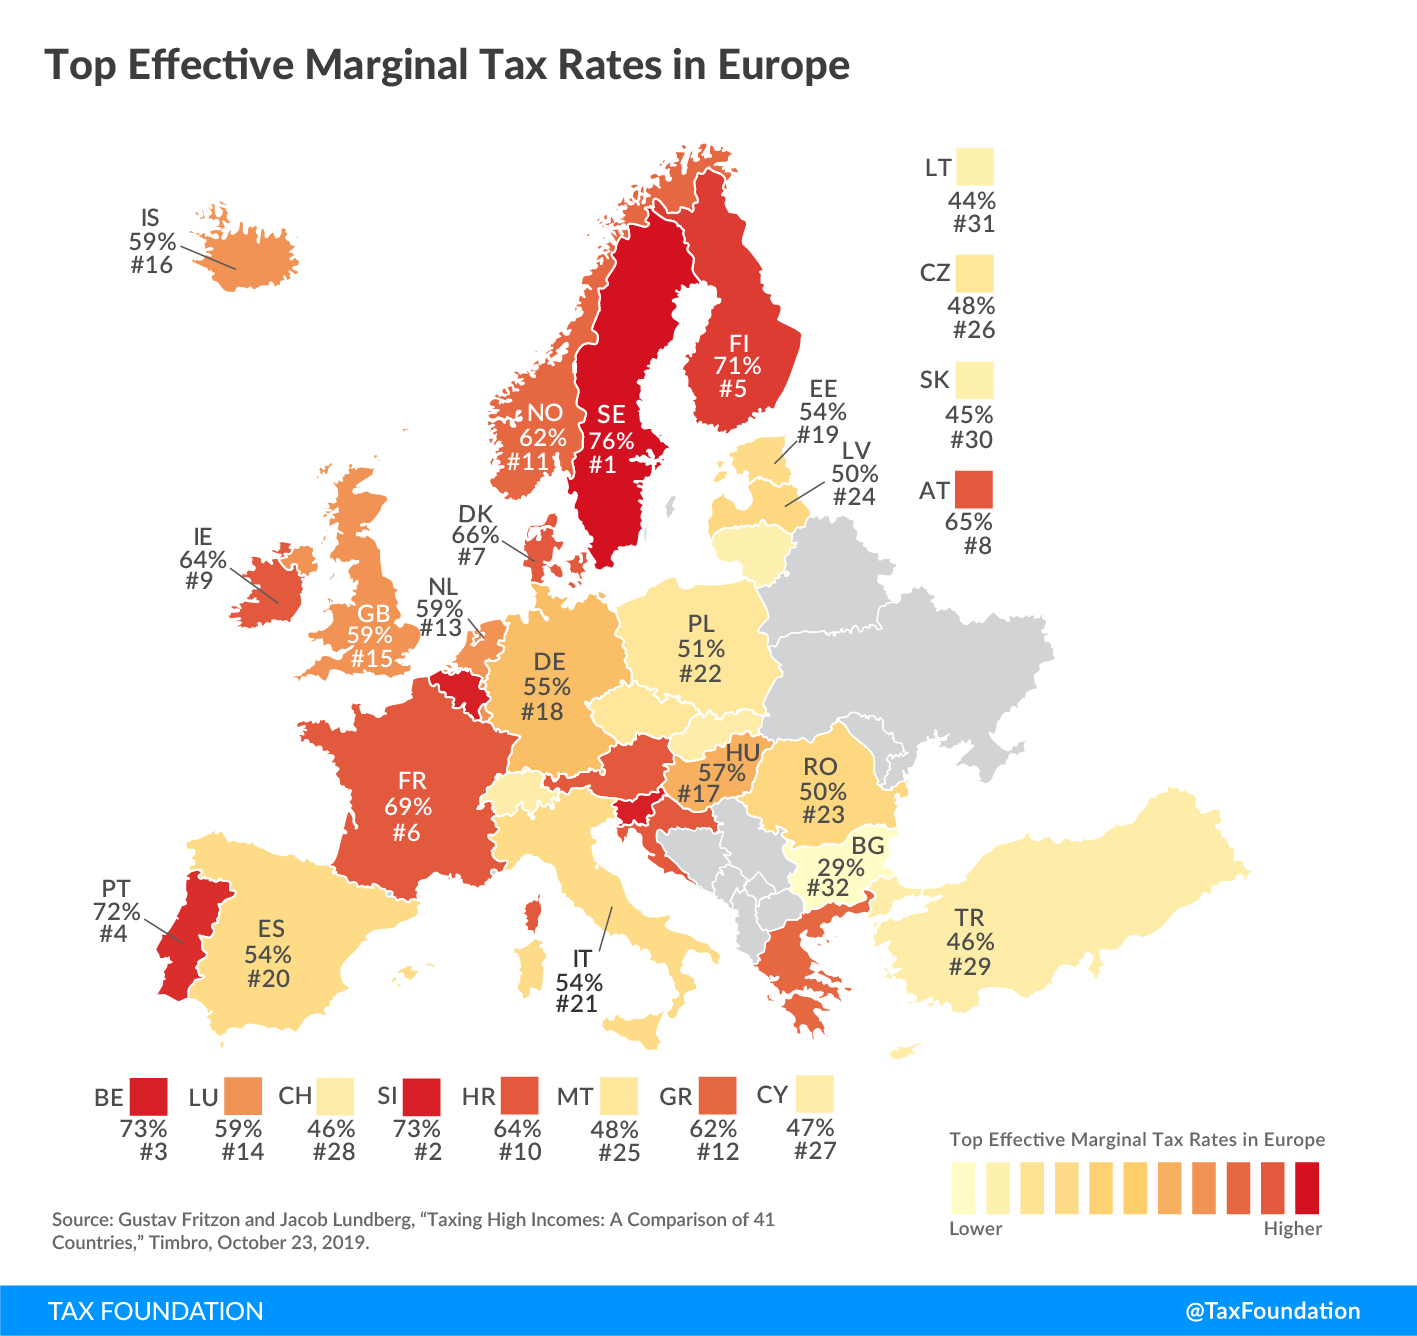 Timbro-Effective-Marginal-Tax-Rates-in-Europe-FV-01